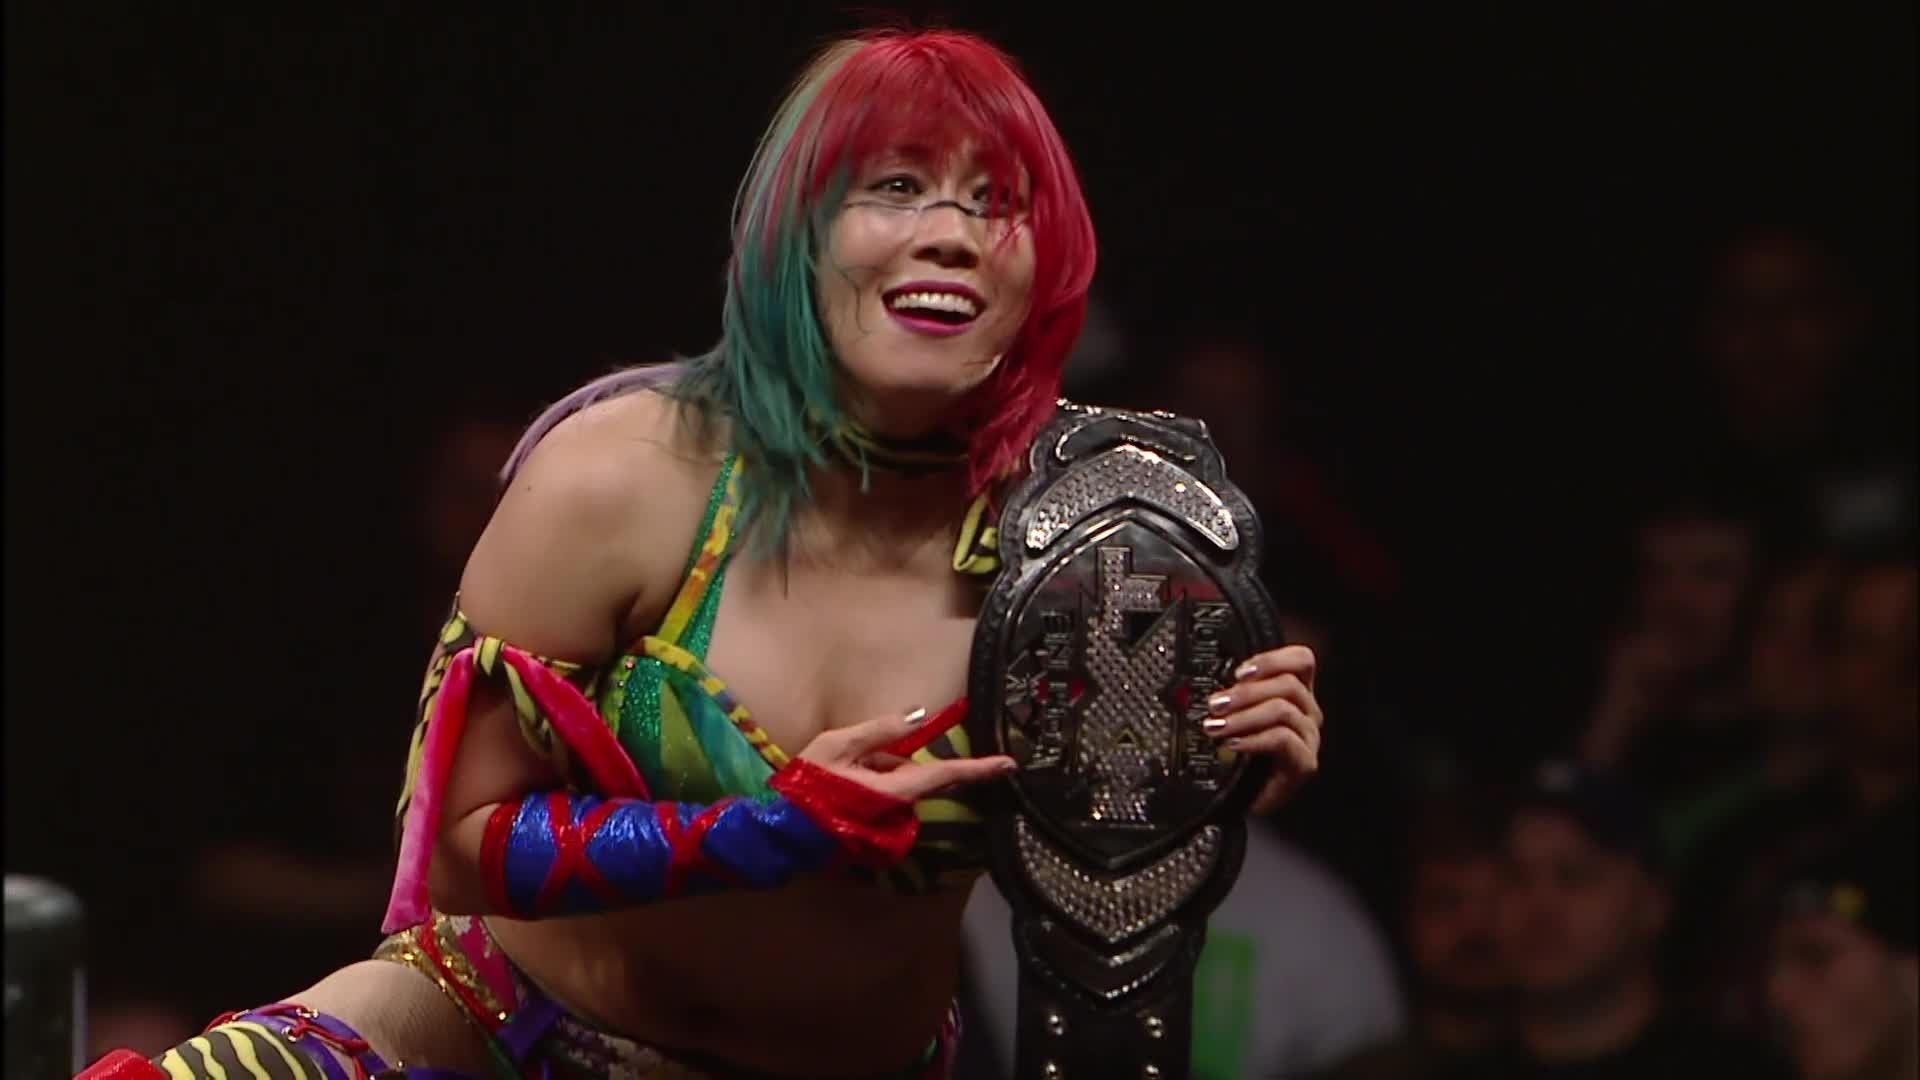 Asuka Wwe Wallpapers posted by Zoey Walker.